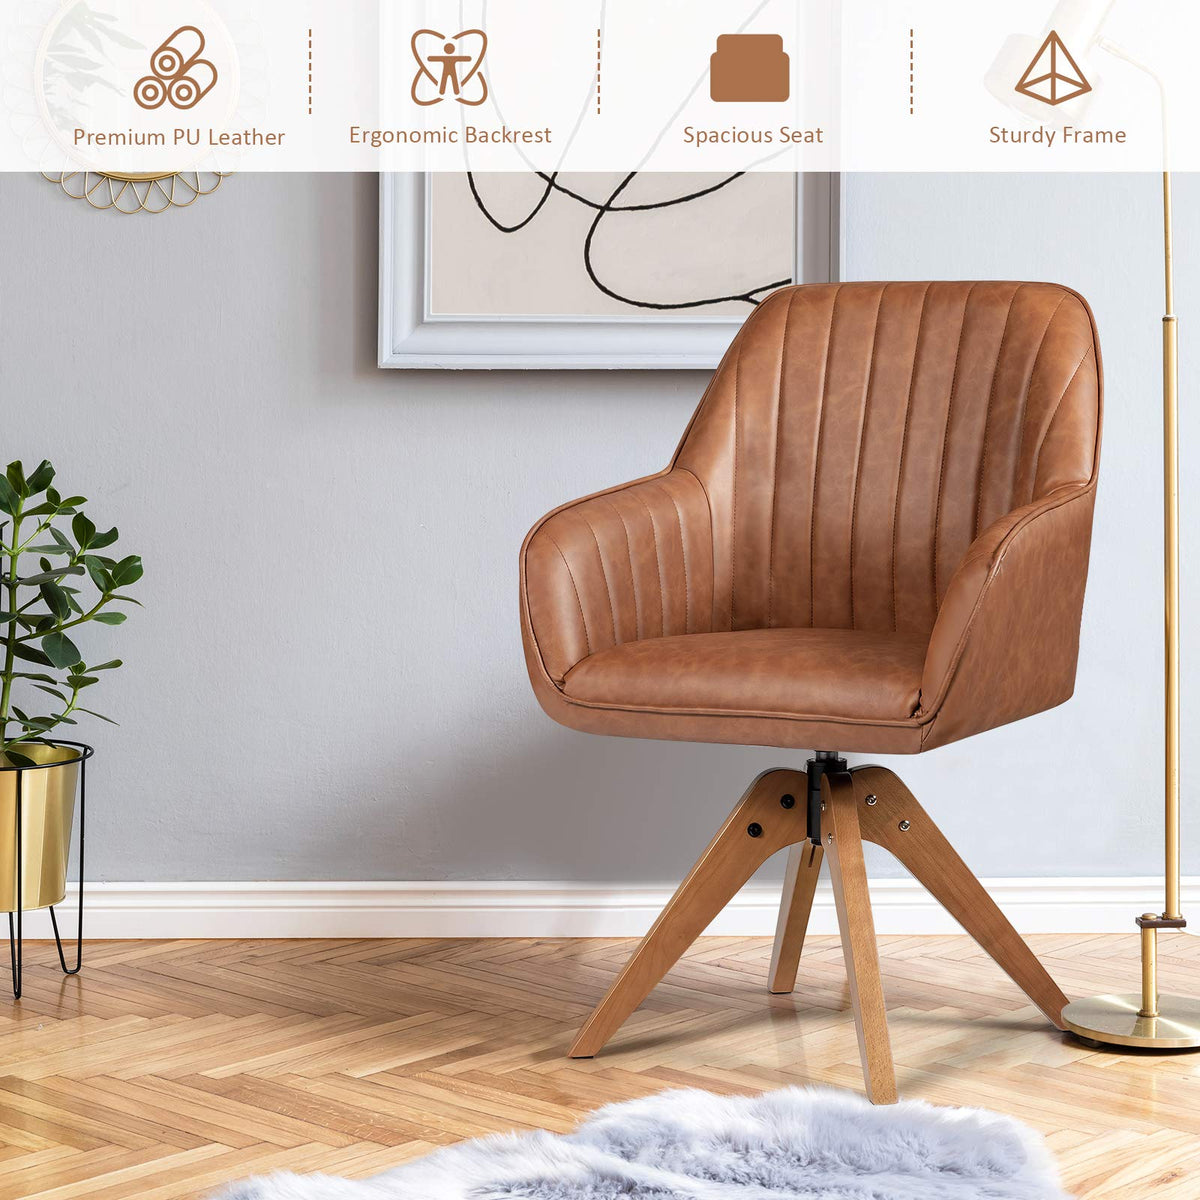 360° Swivel Accent Chair, Upholstered Armchair w/High-Density Sponge, Solid Wood Legs, PU Leather, Brown